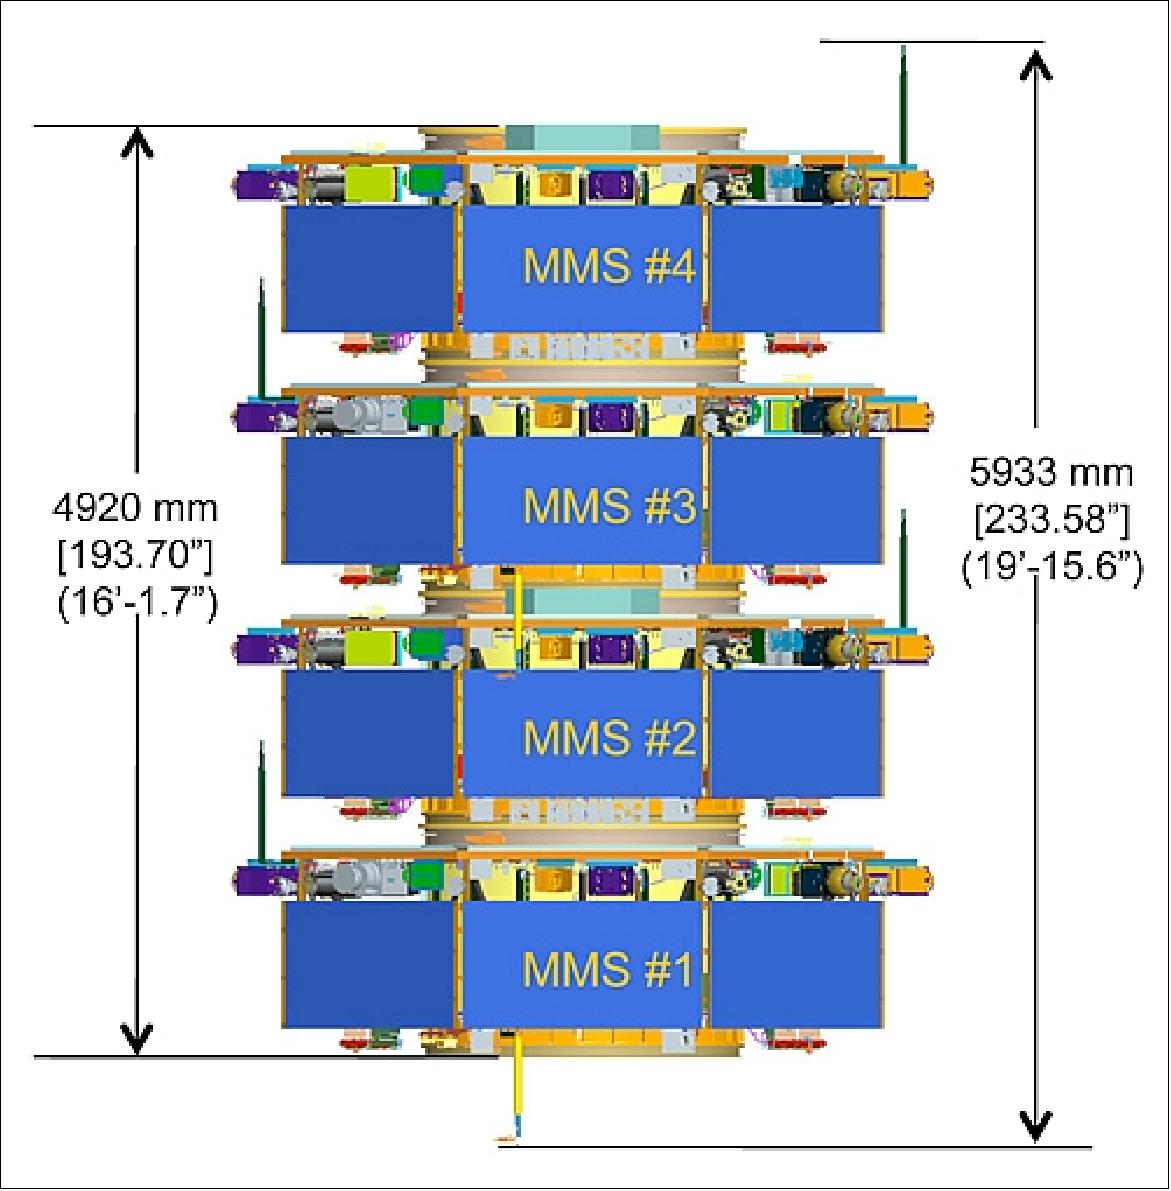 Figure 6: Stacked launch configuration of the MMS spacecraft (image credit: NASA)